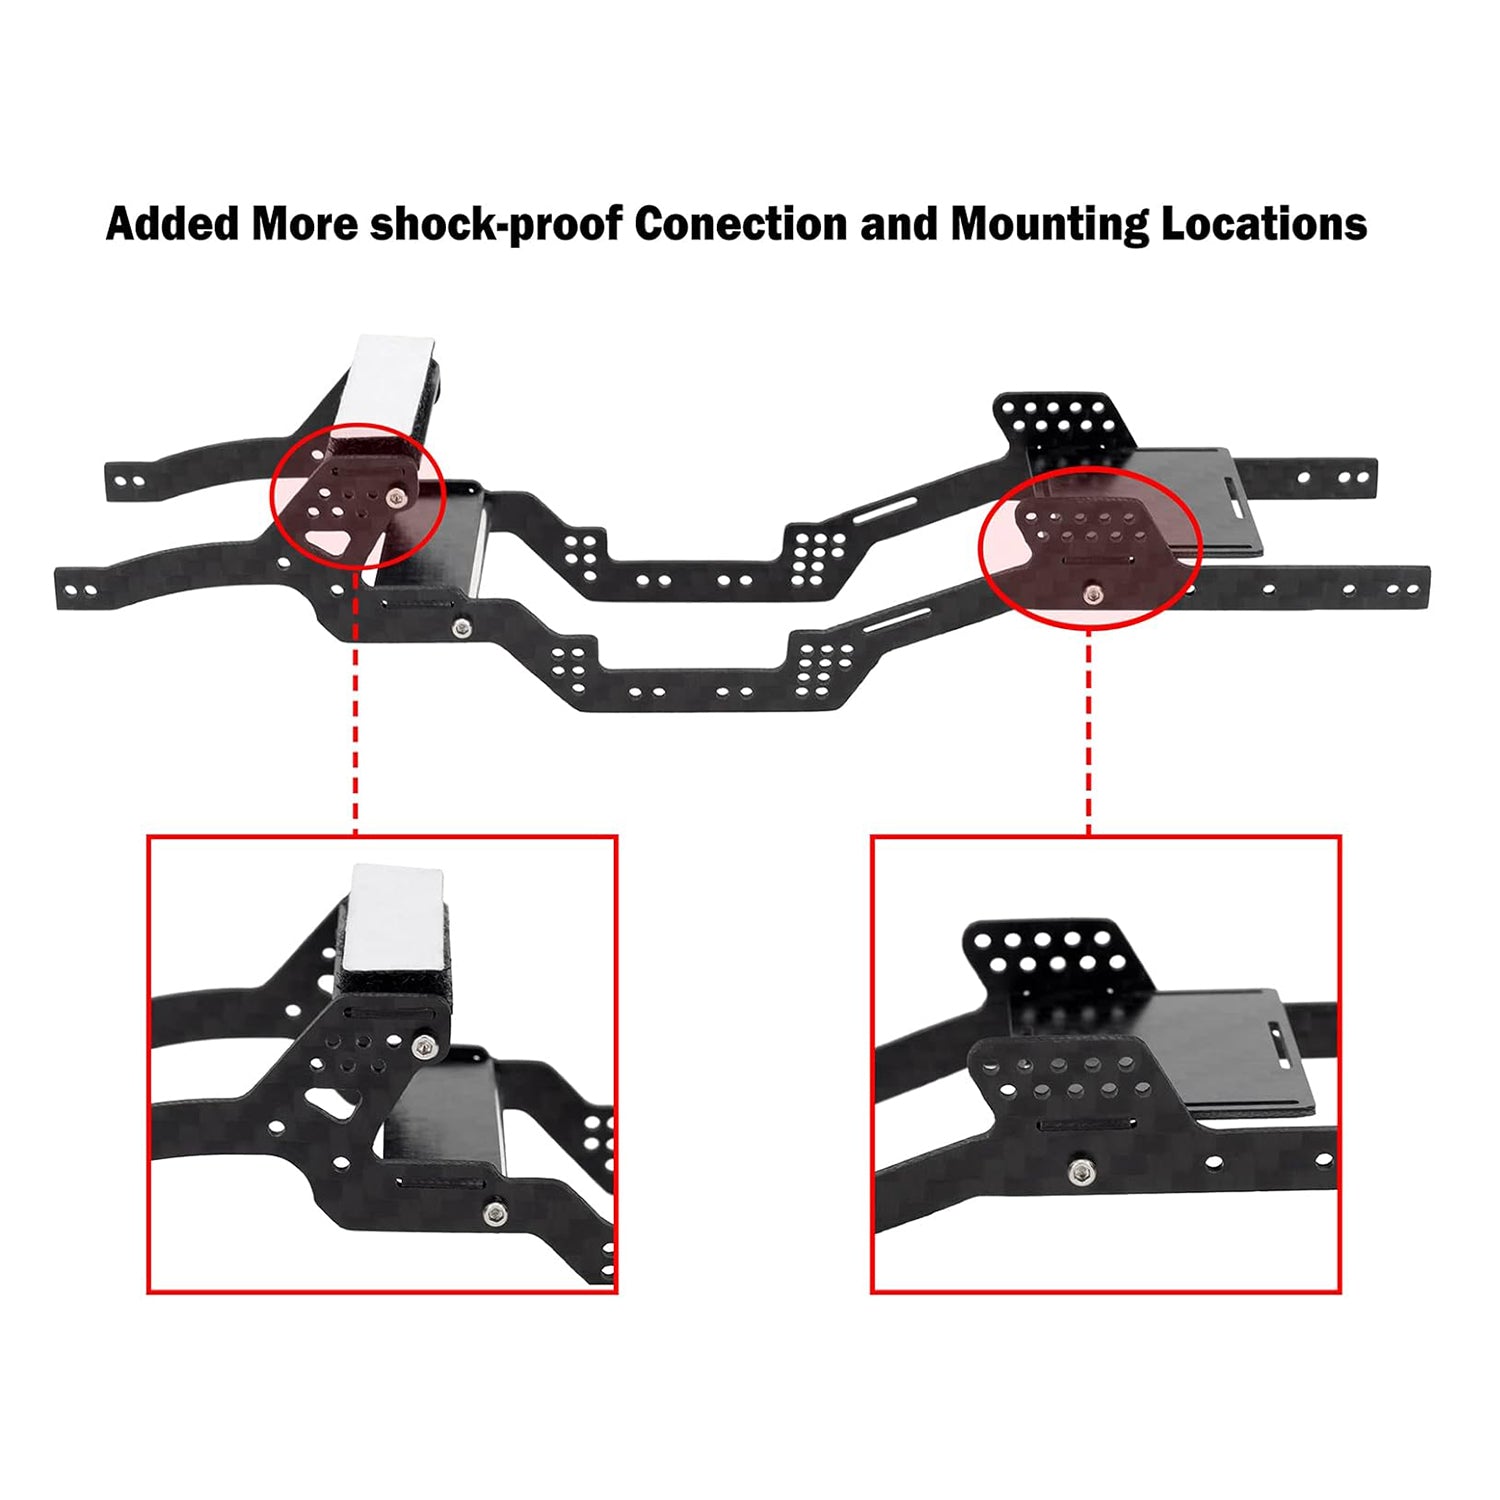 add more shock-proof conection and mounting locations